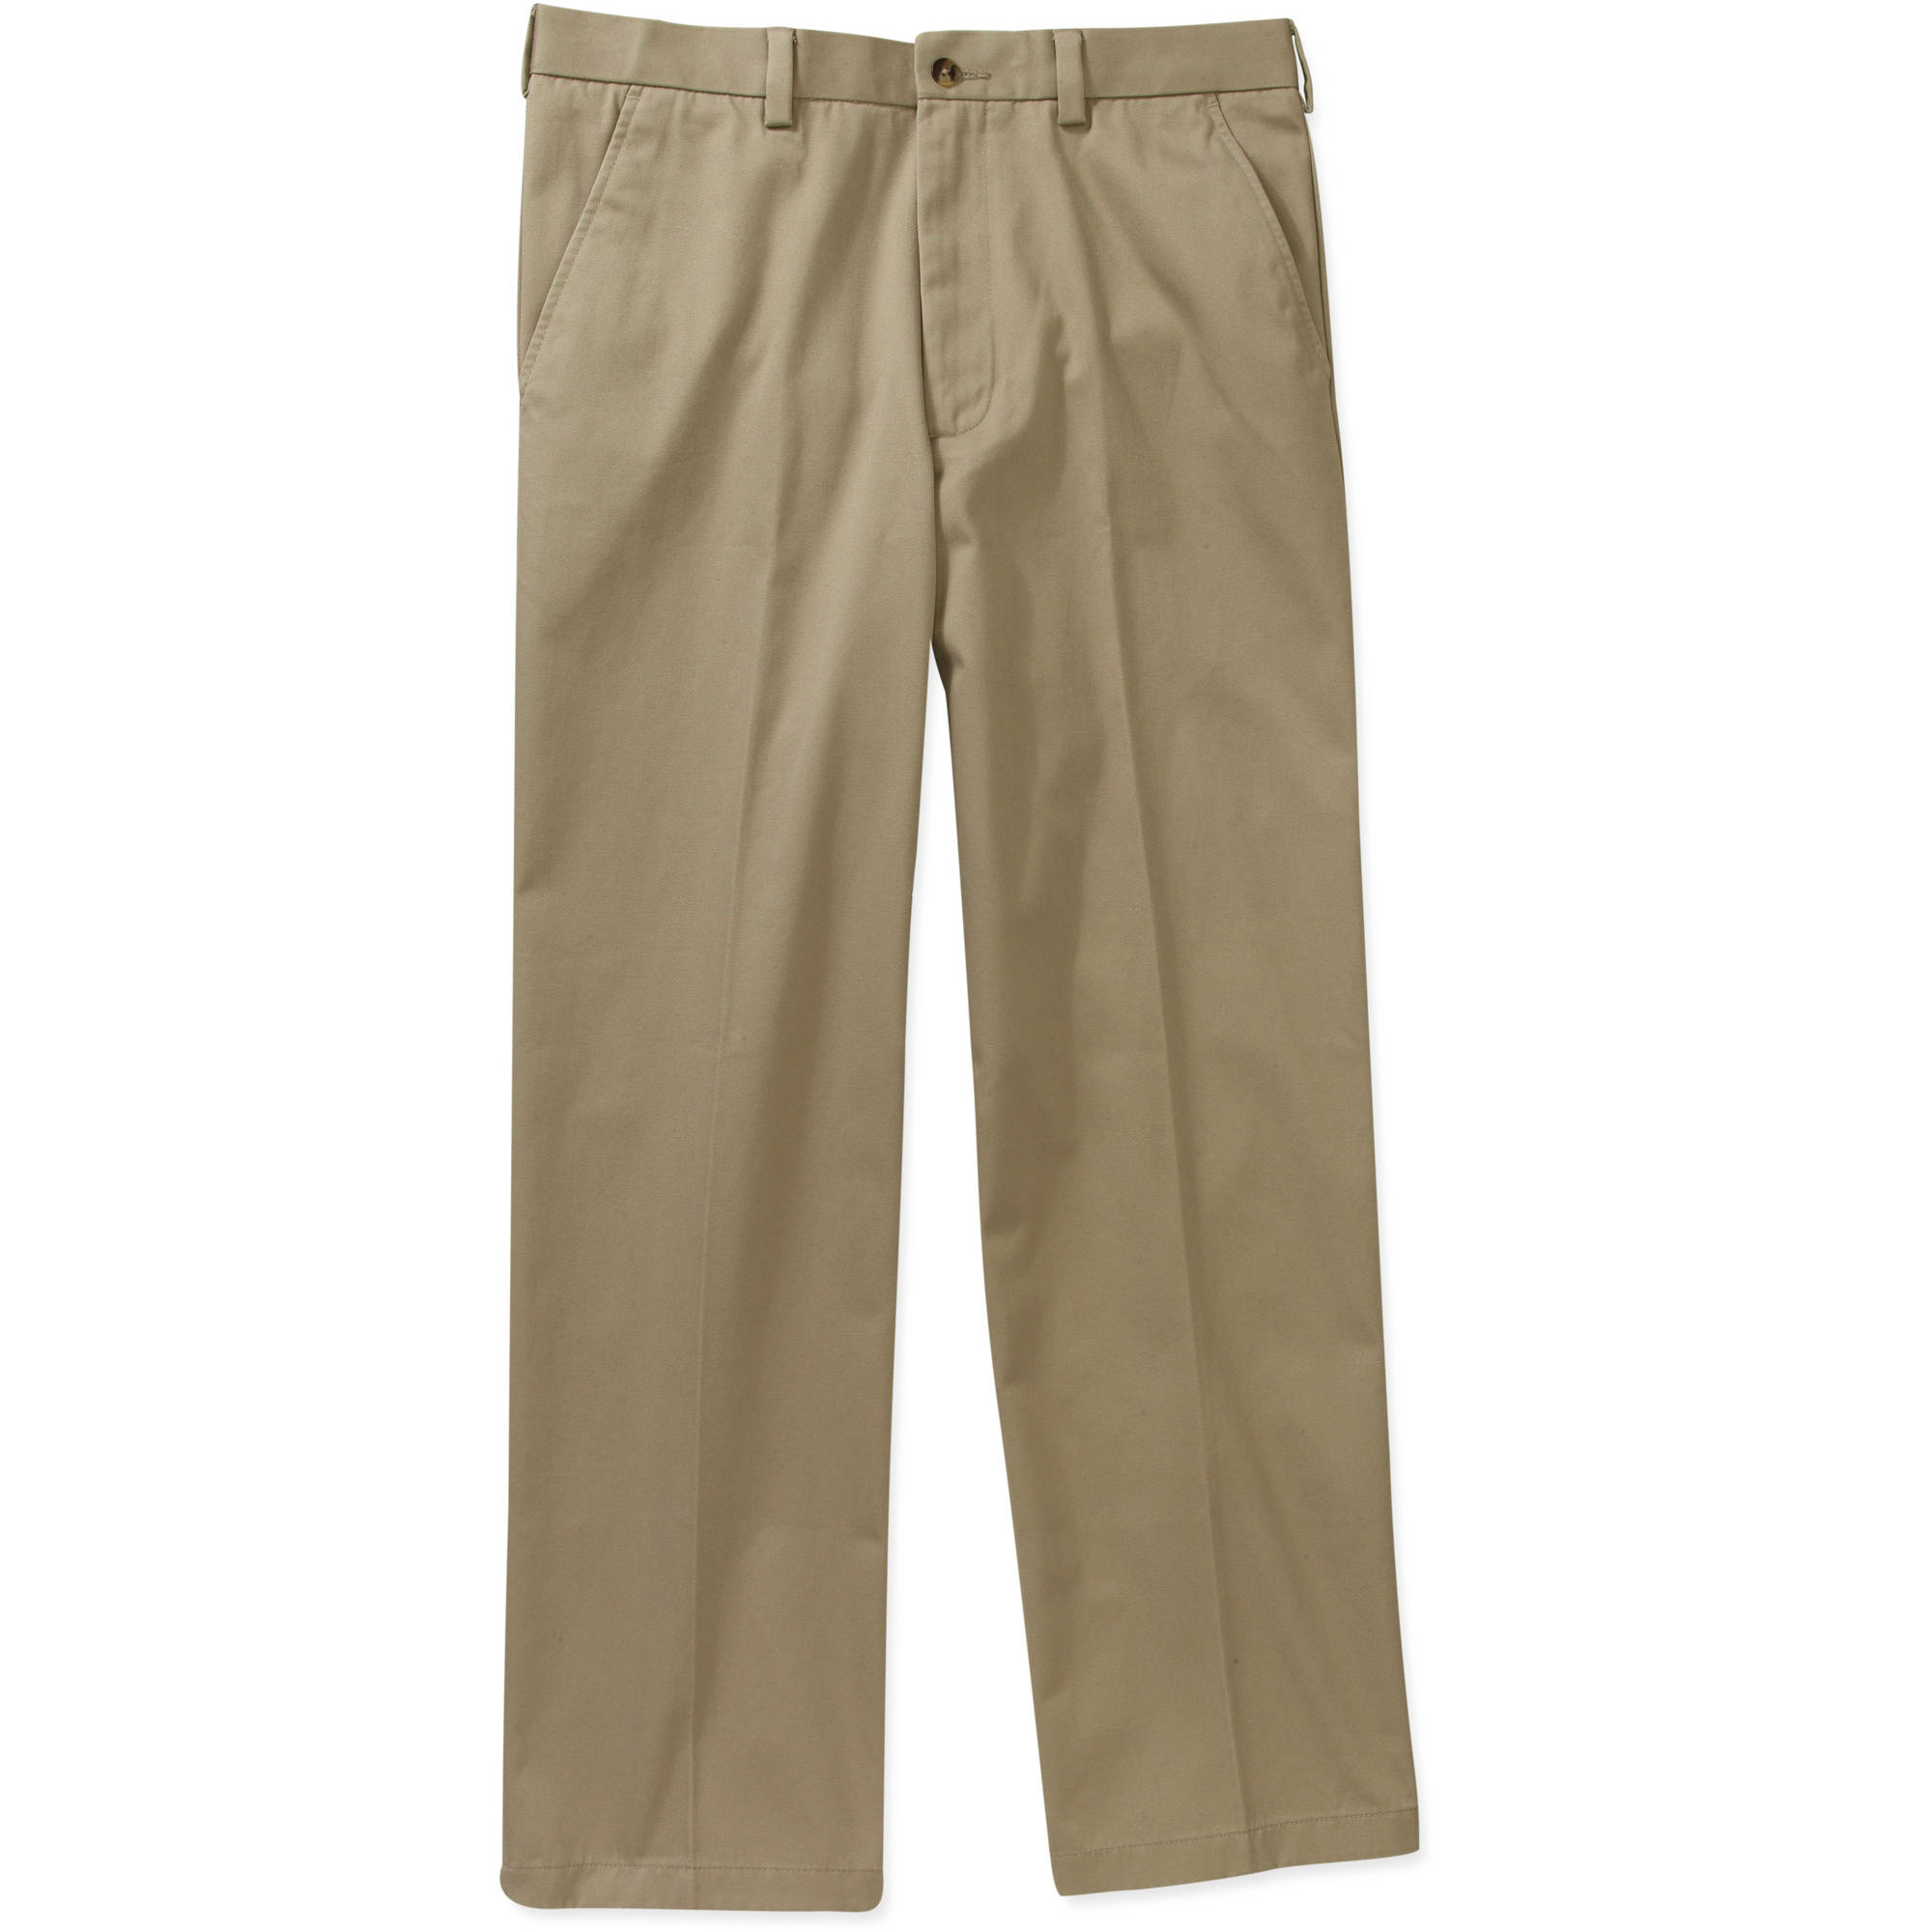 George Rigid Flat Front Pant - image 1 of 2